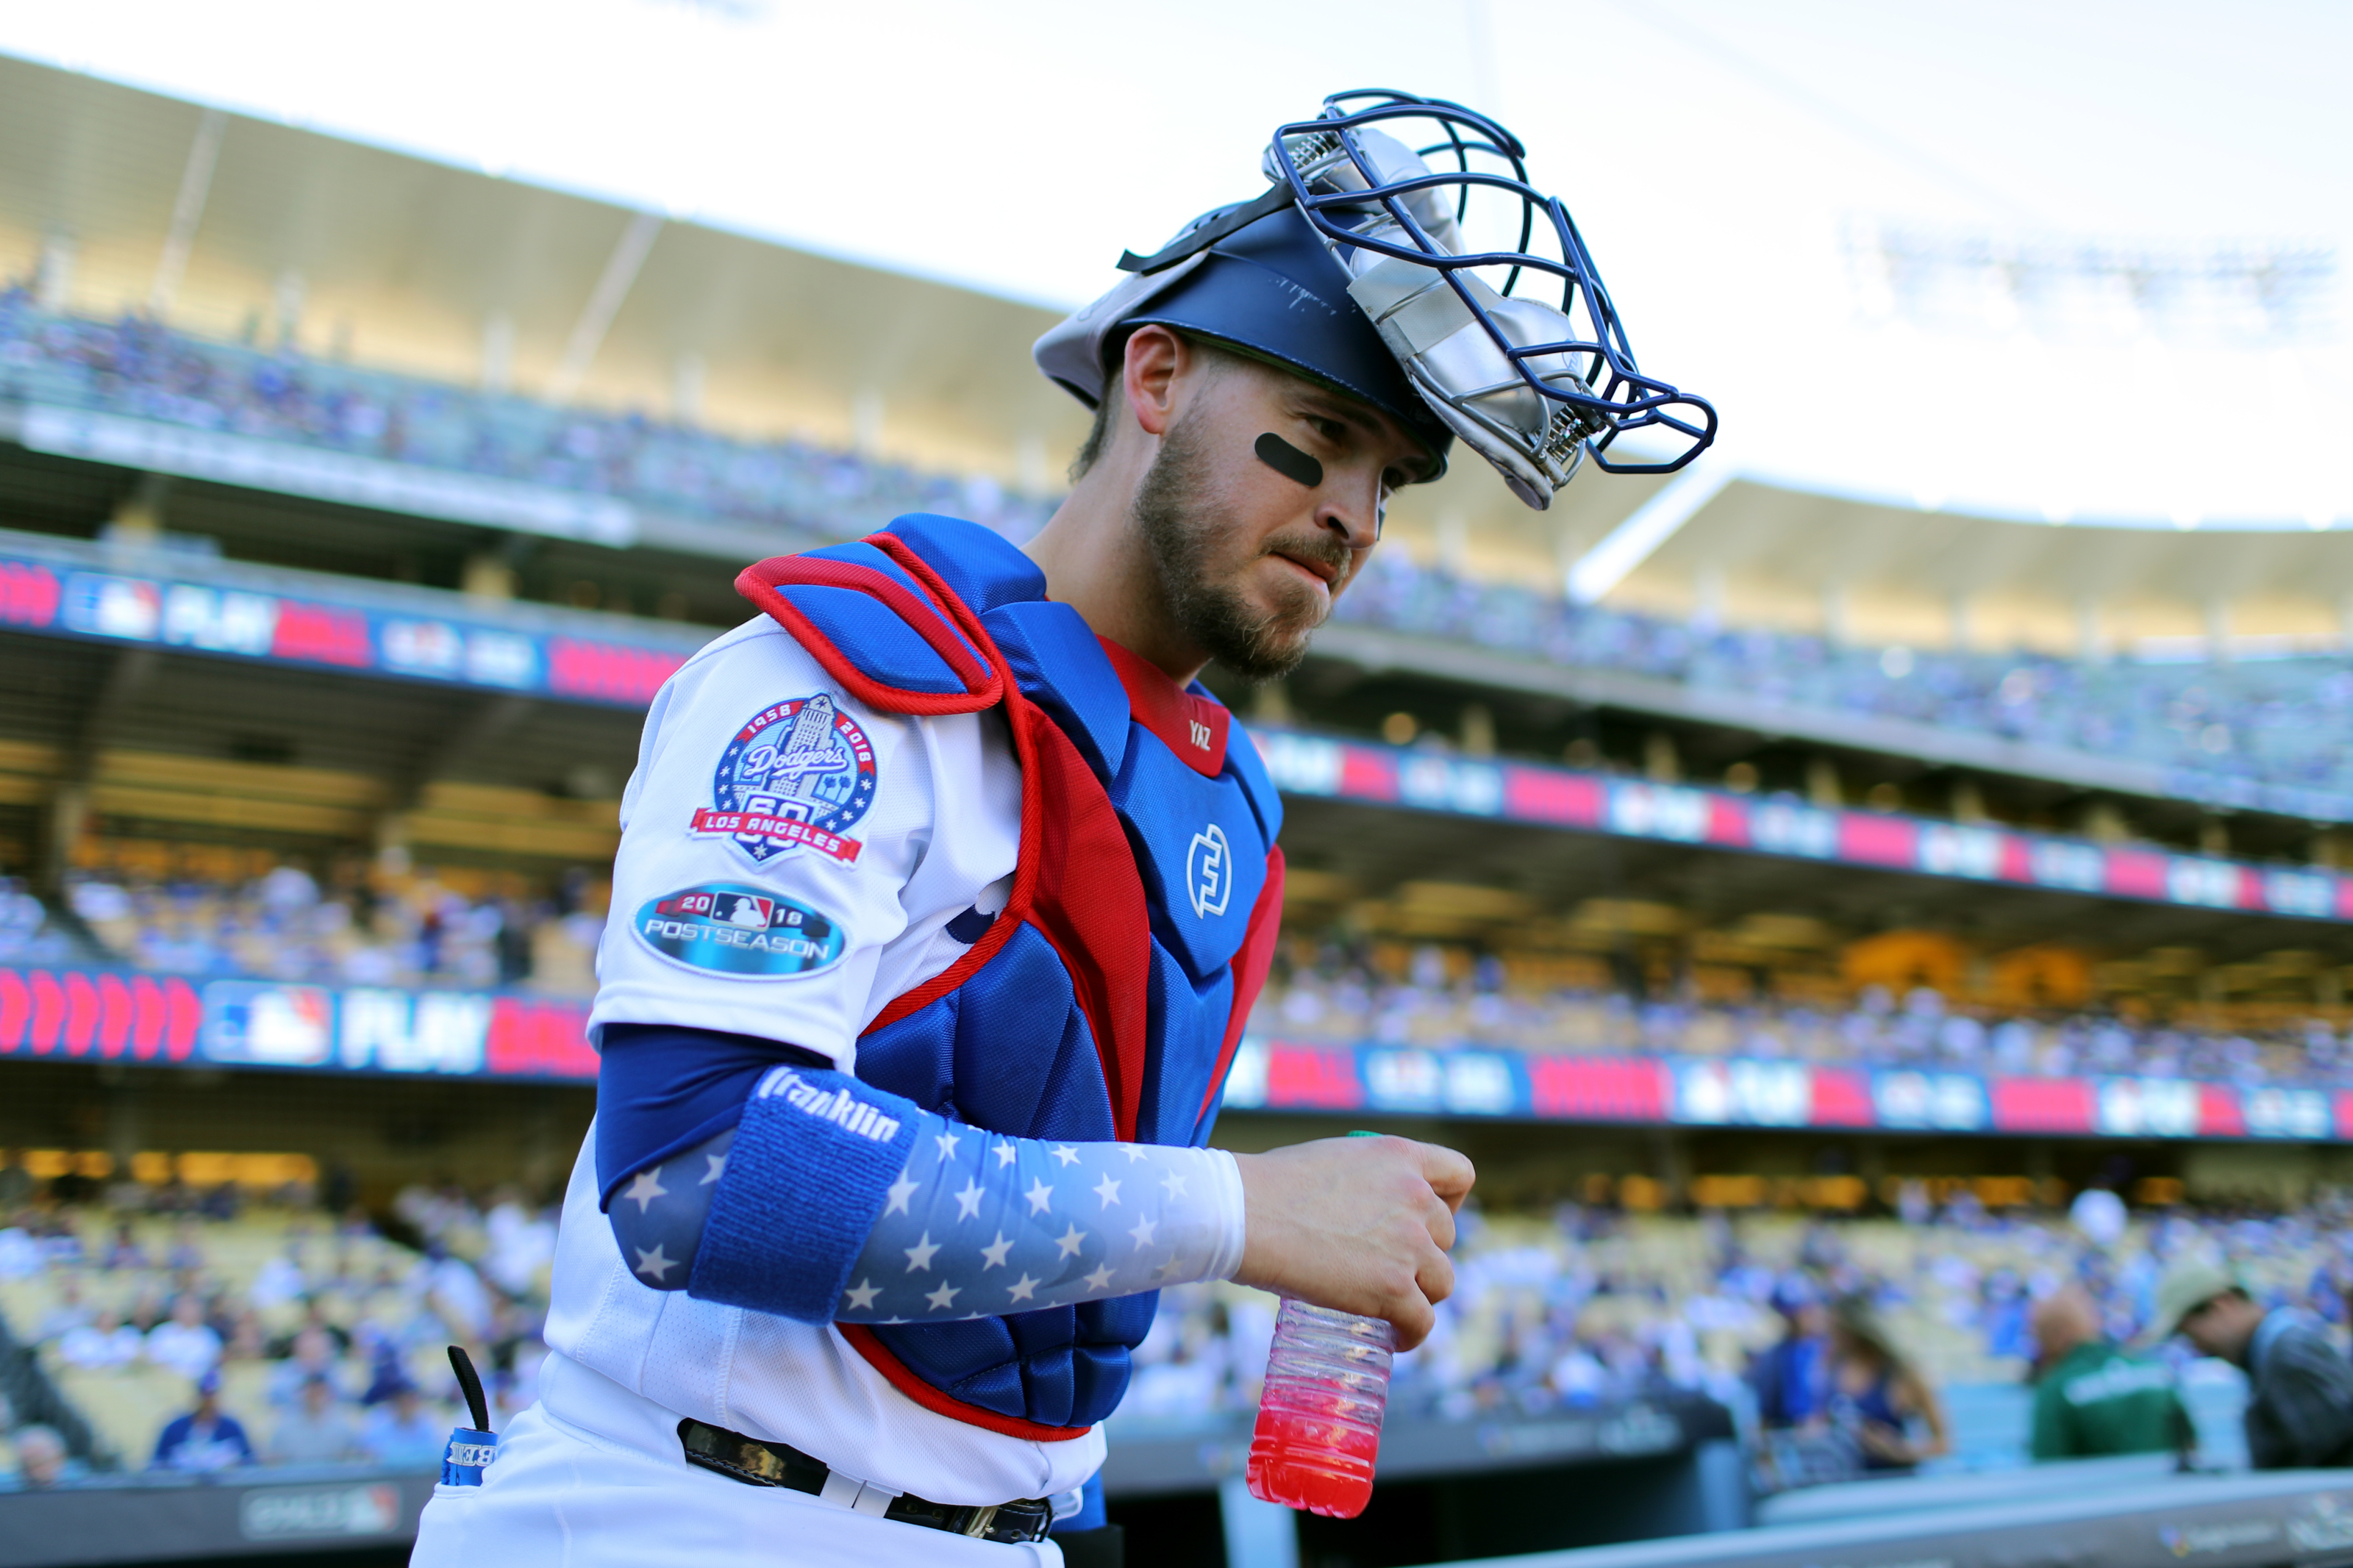 Yasmani Grandal agrees to one-year, $18.25M deal with Brewers